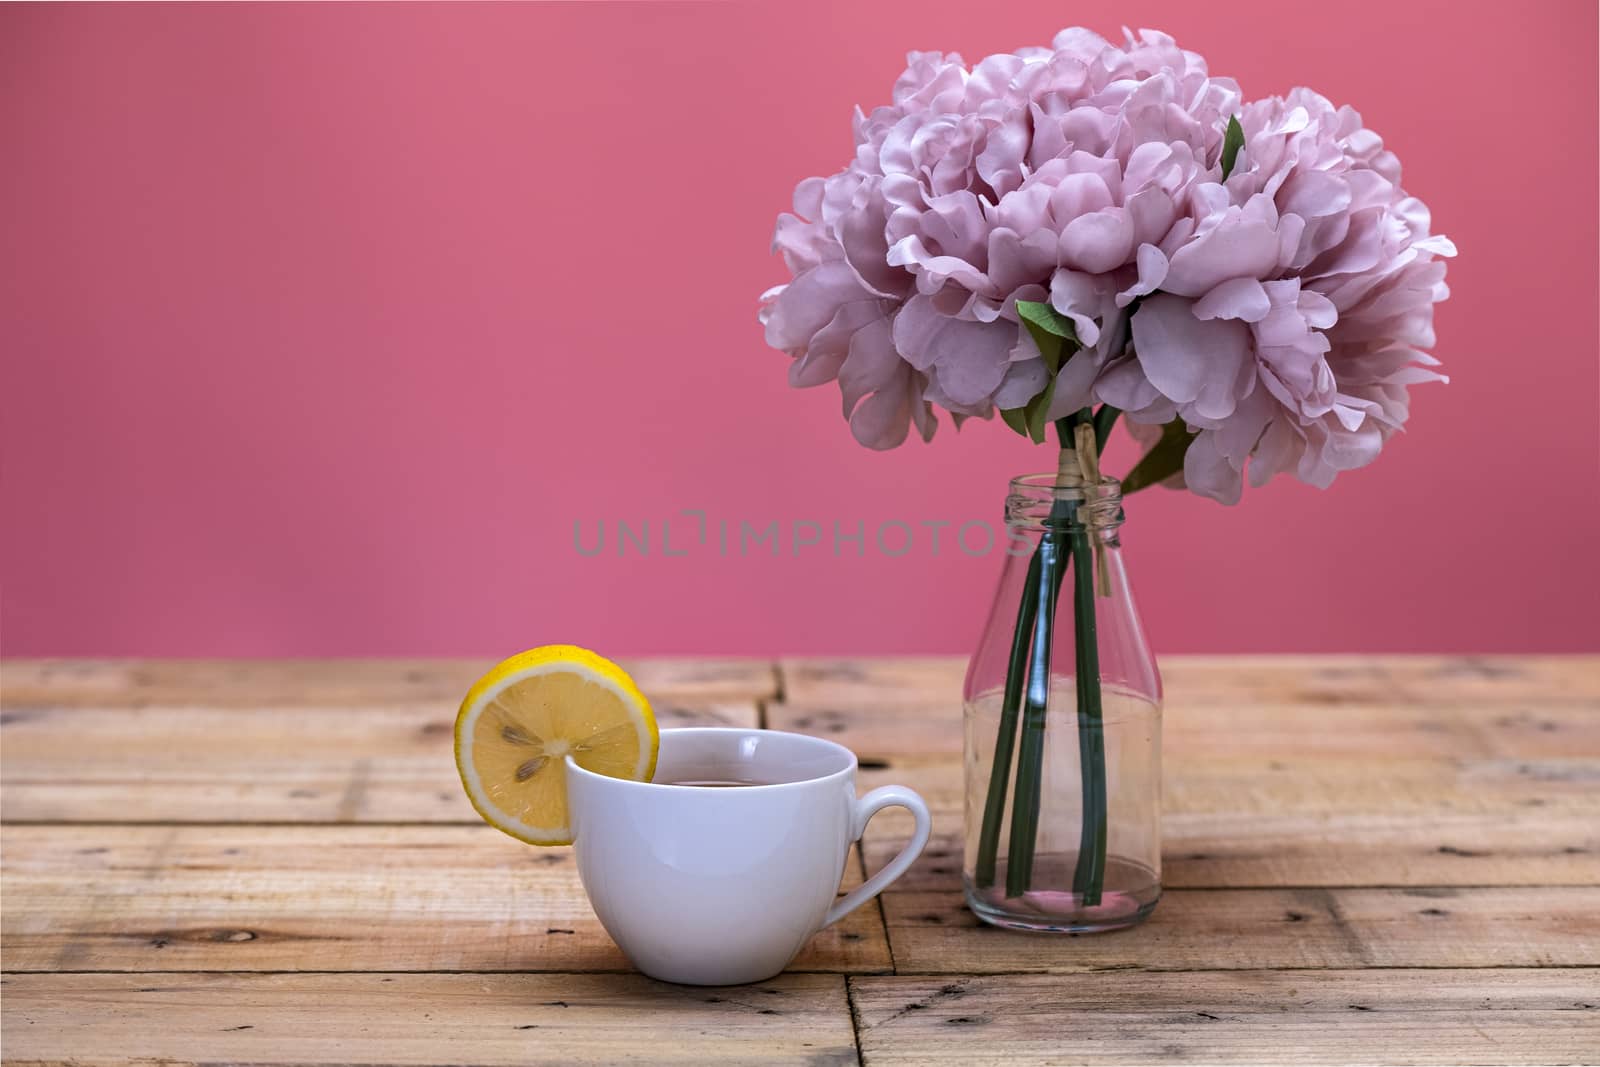 Lemon tea in white porcelein cup with lemon slice and wooden background.